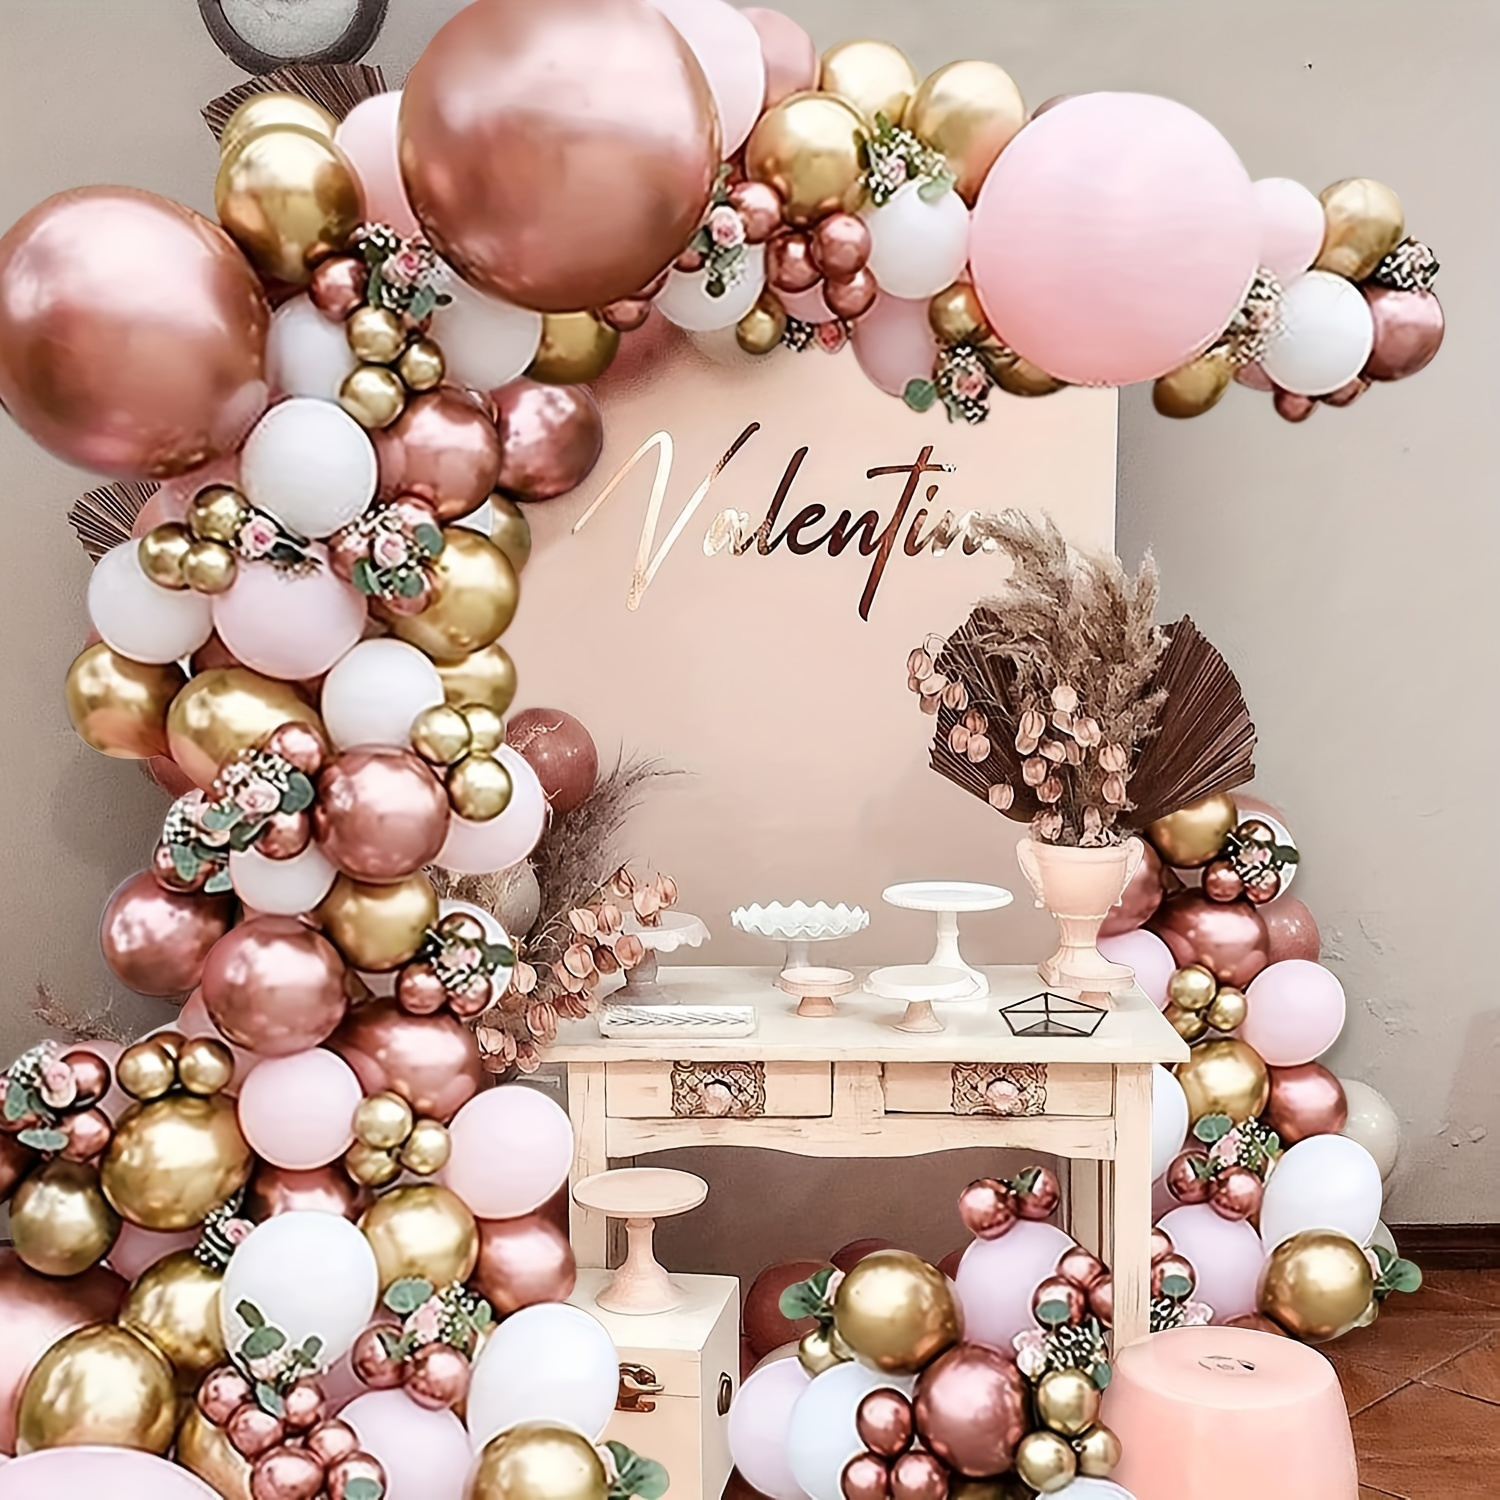 

143-piece Elegant Pink Balloon Garland Kit - Rose Gold & Metallic Accents For Weddings, Bridal Showers, Birthdays & Anniversaries - Perfect For Stunning Photo Backdrops